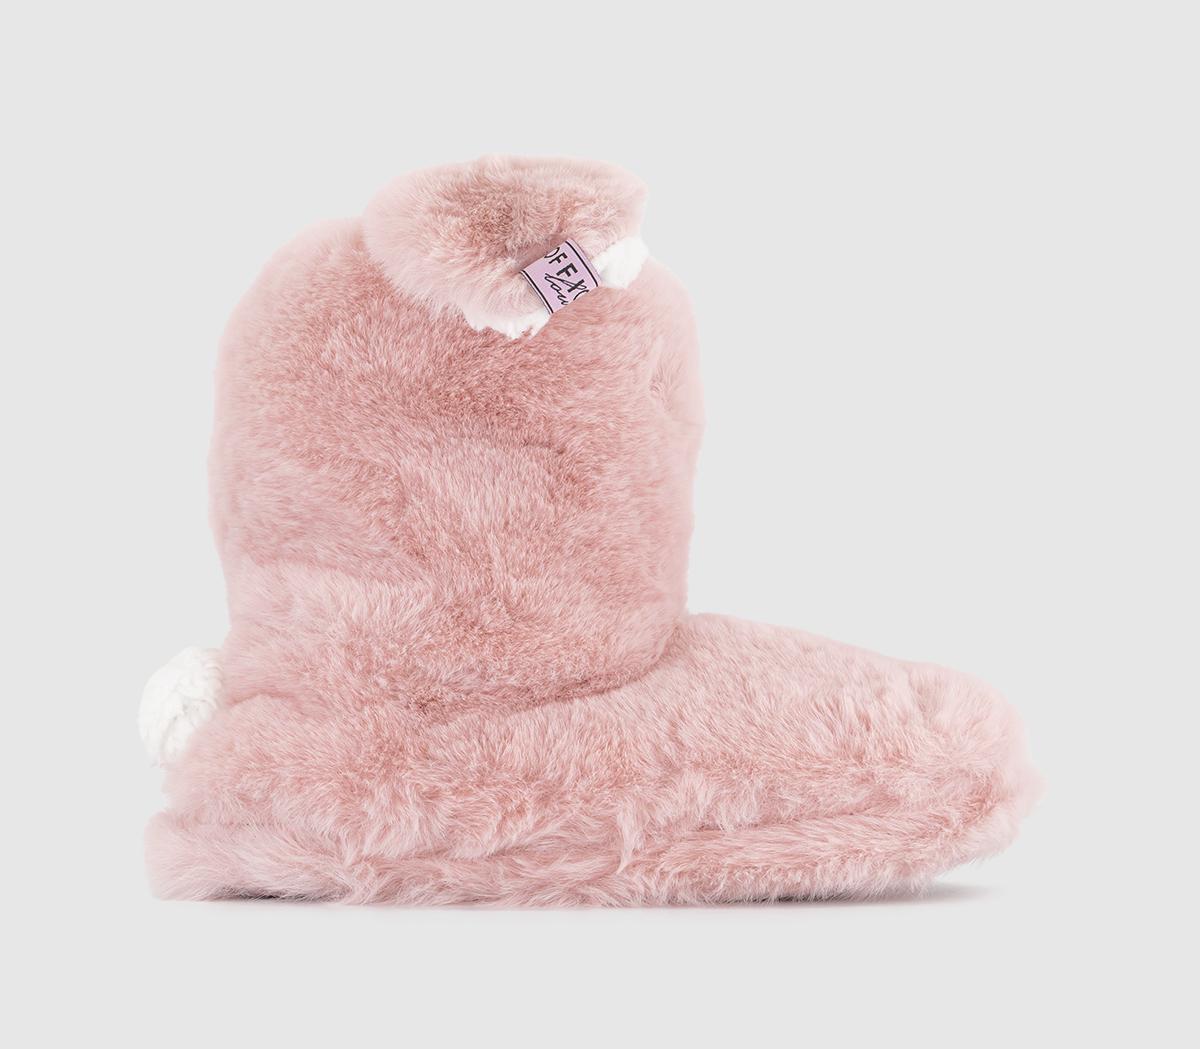 OFFICE LoungeRuby Bunny Slipper BootsNew Pink